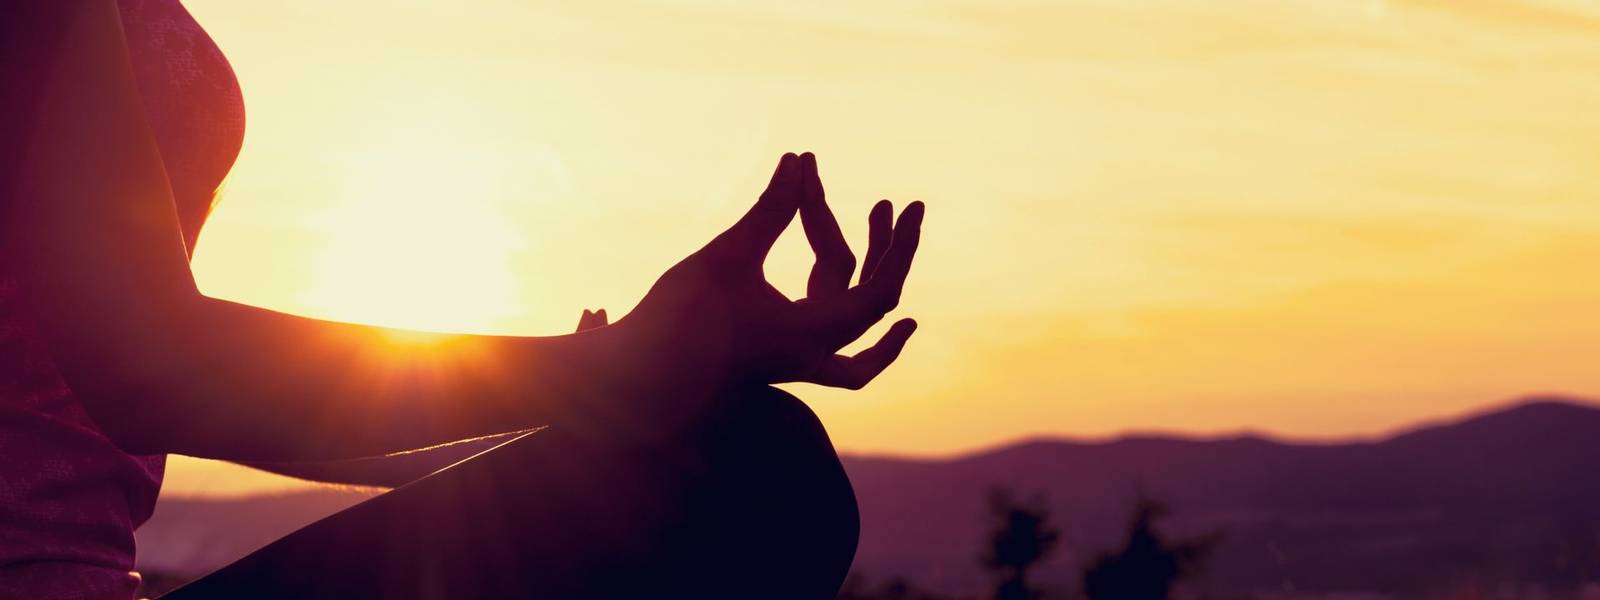 Young athletic woman practicing yoga on a meadow at sunset, silhouette